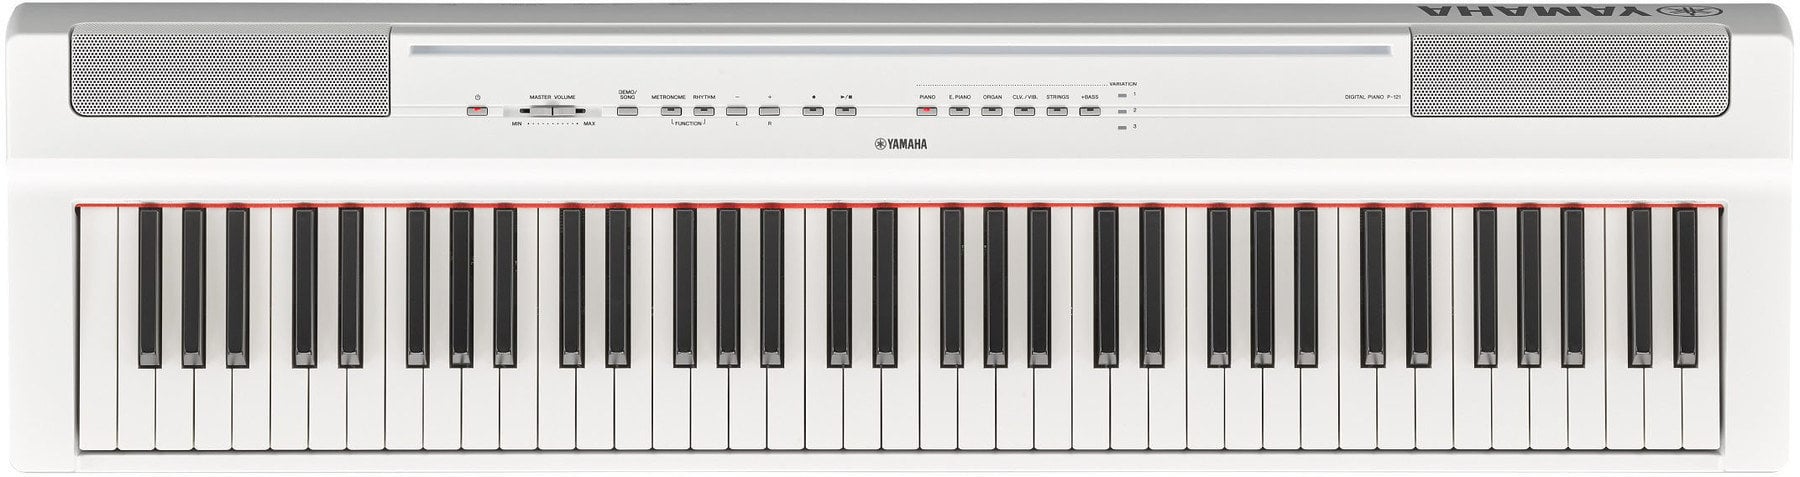 Digitaal stagepiano Yamaha P-121 WH Digitaal stagepiano